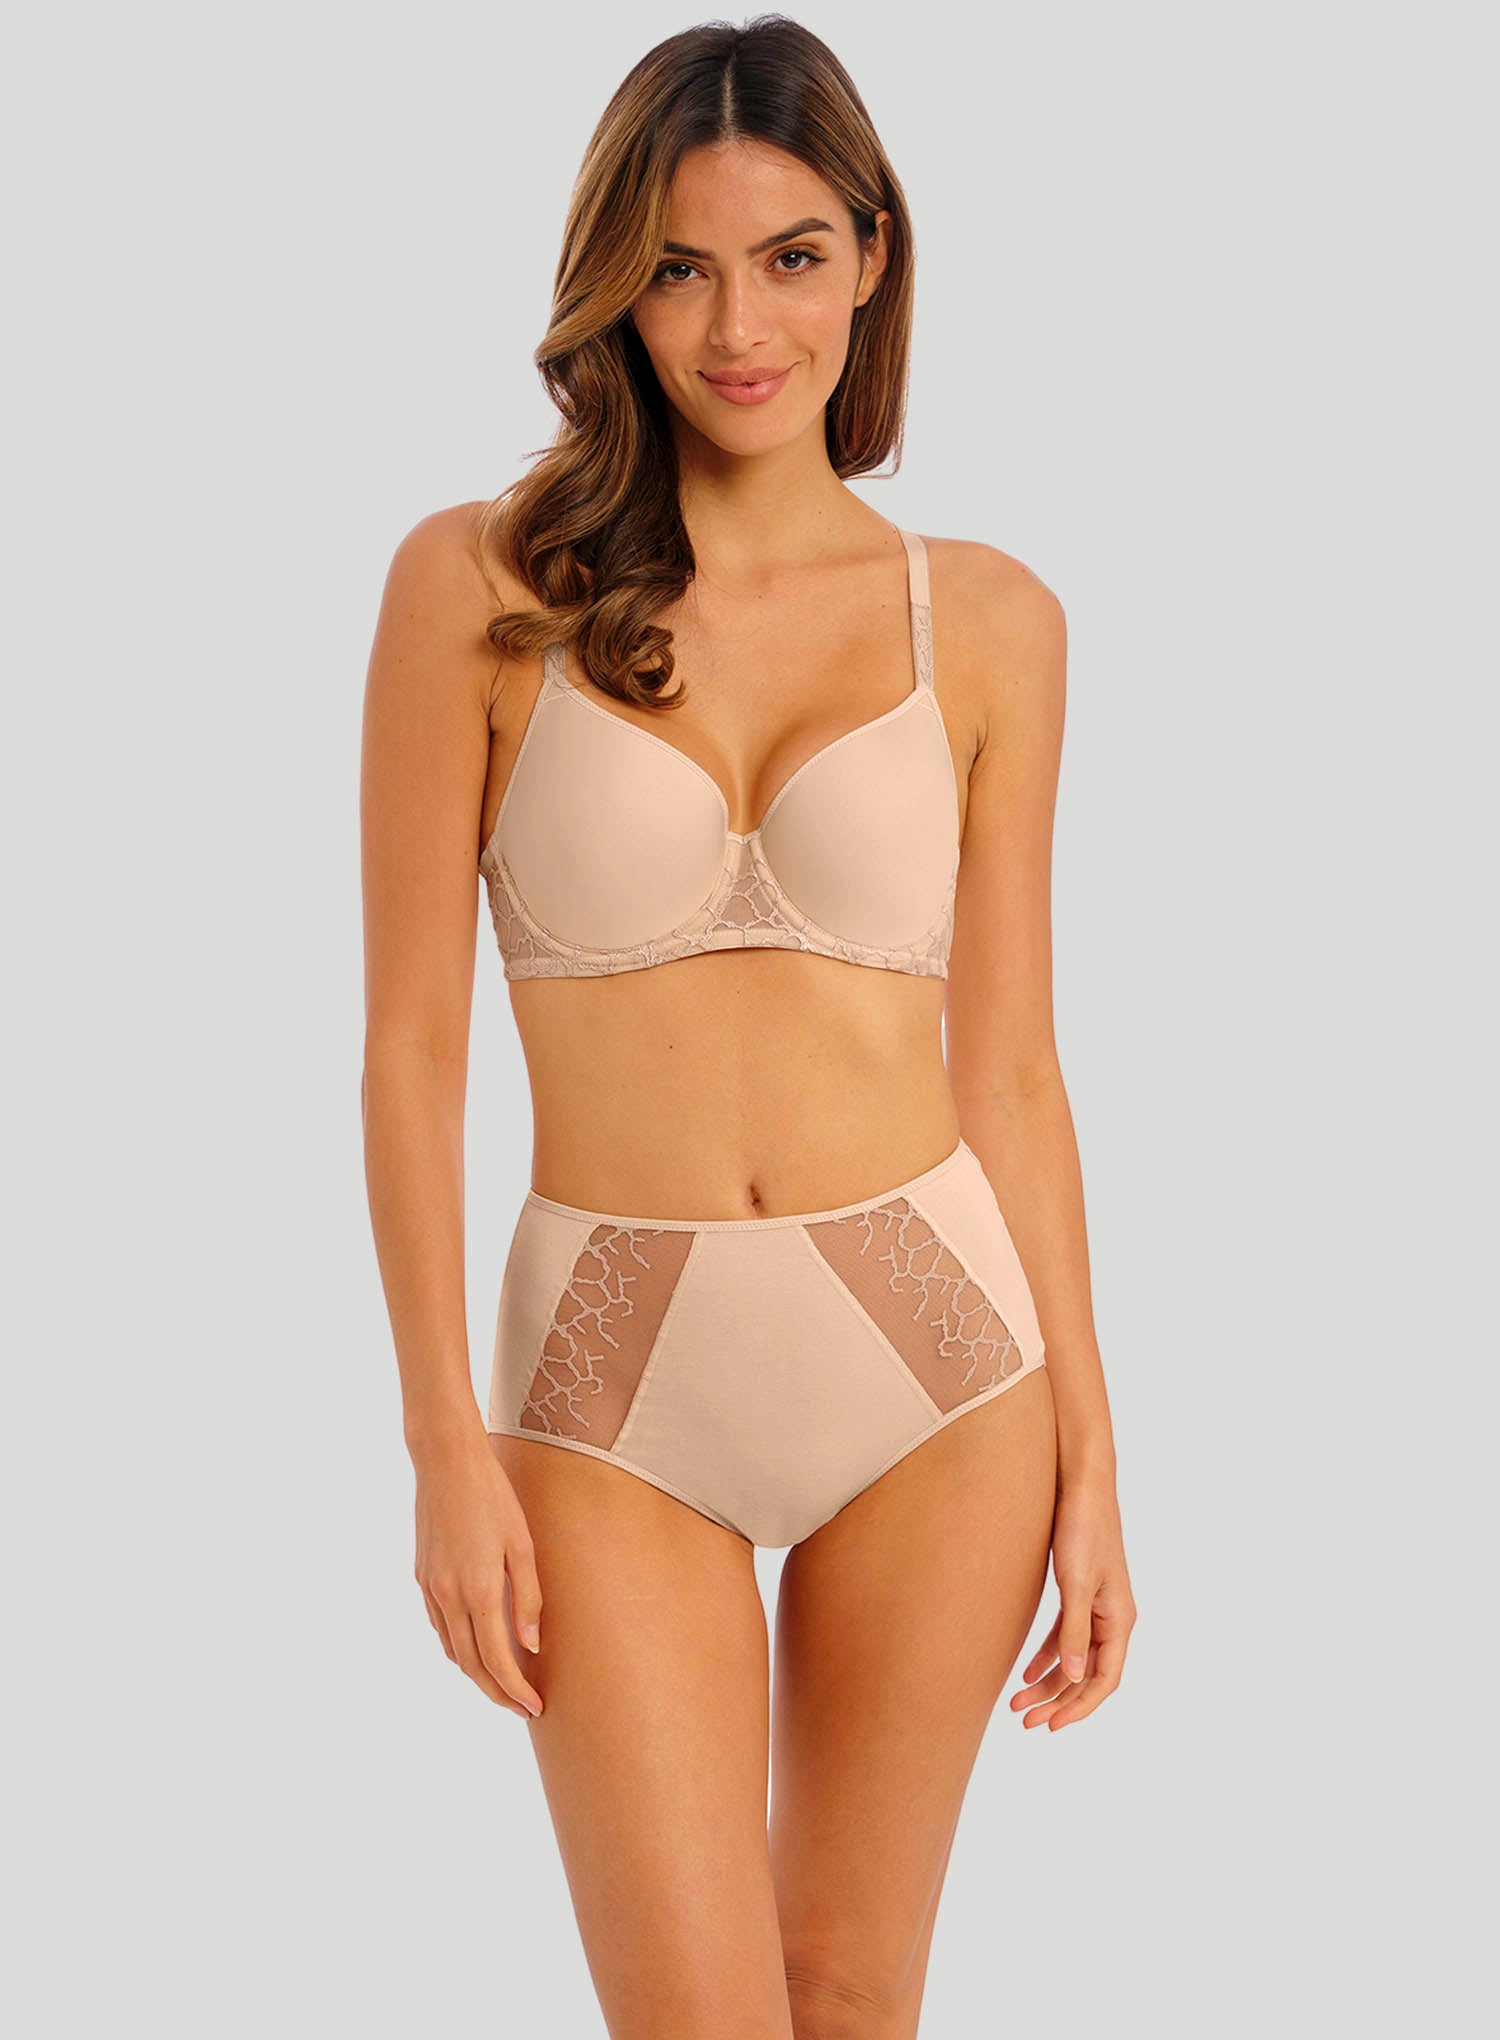 Lisse Underwire Moulded Non Padded Bra by Wacoal - Embrace